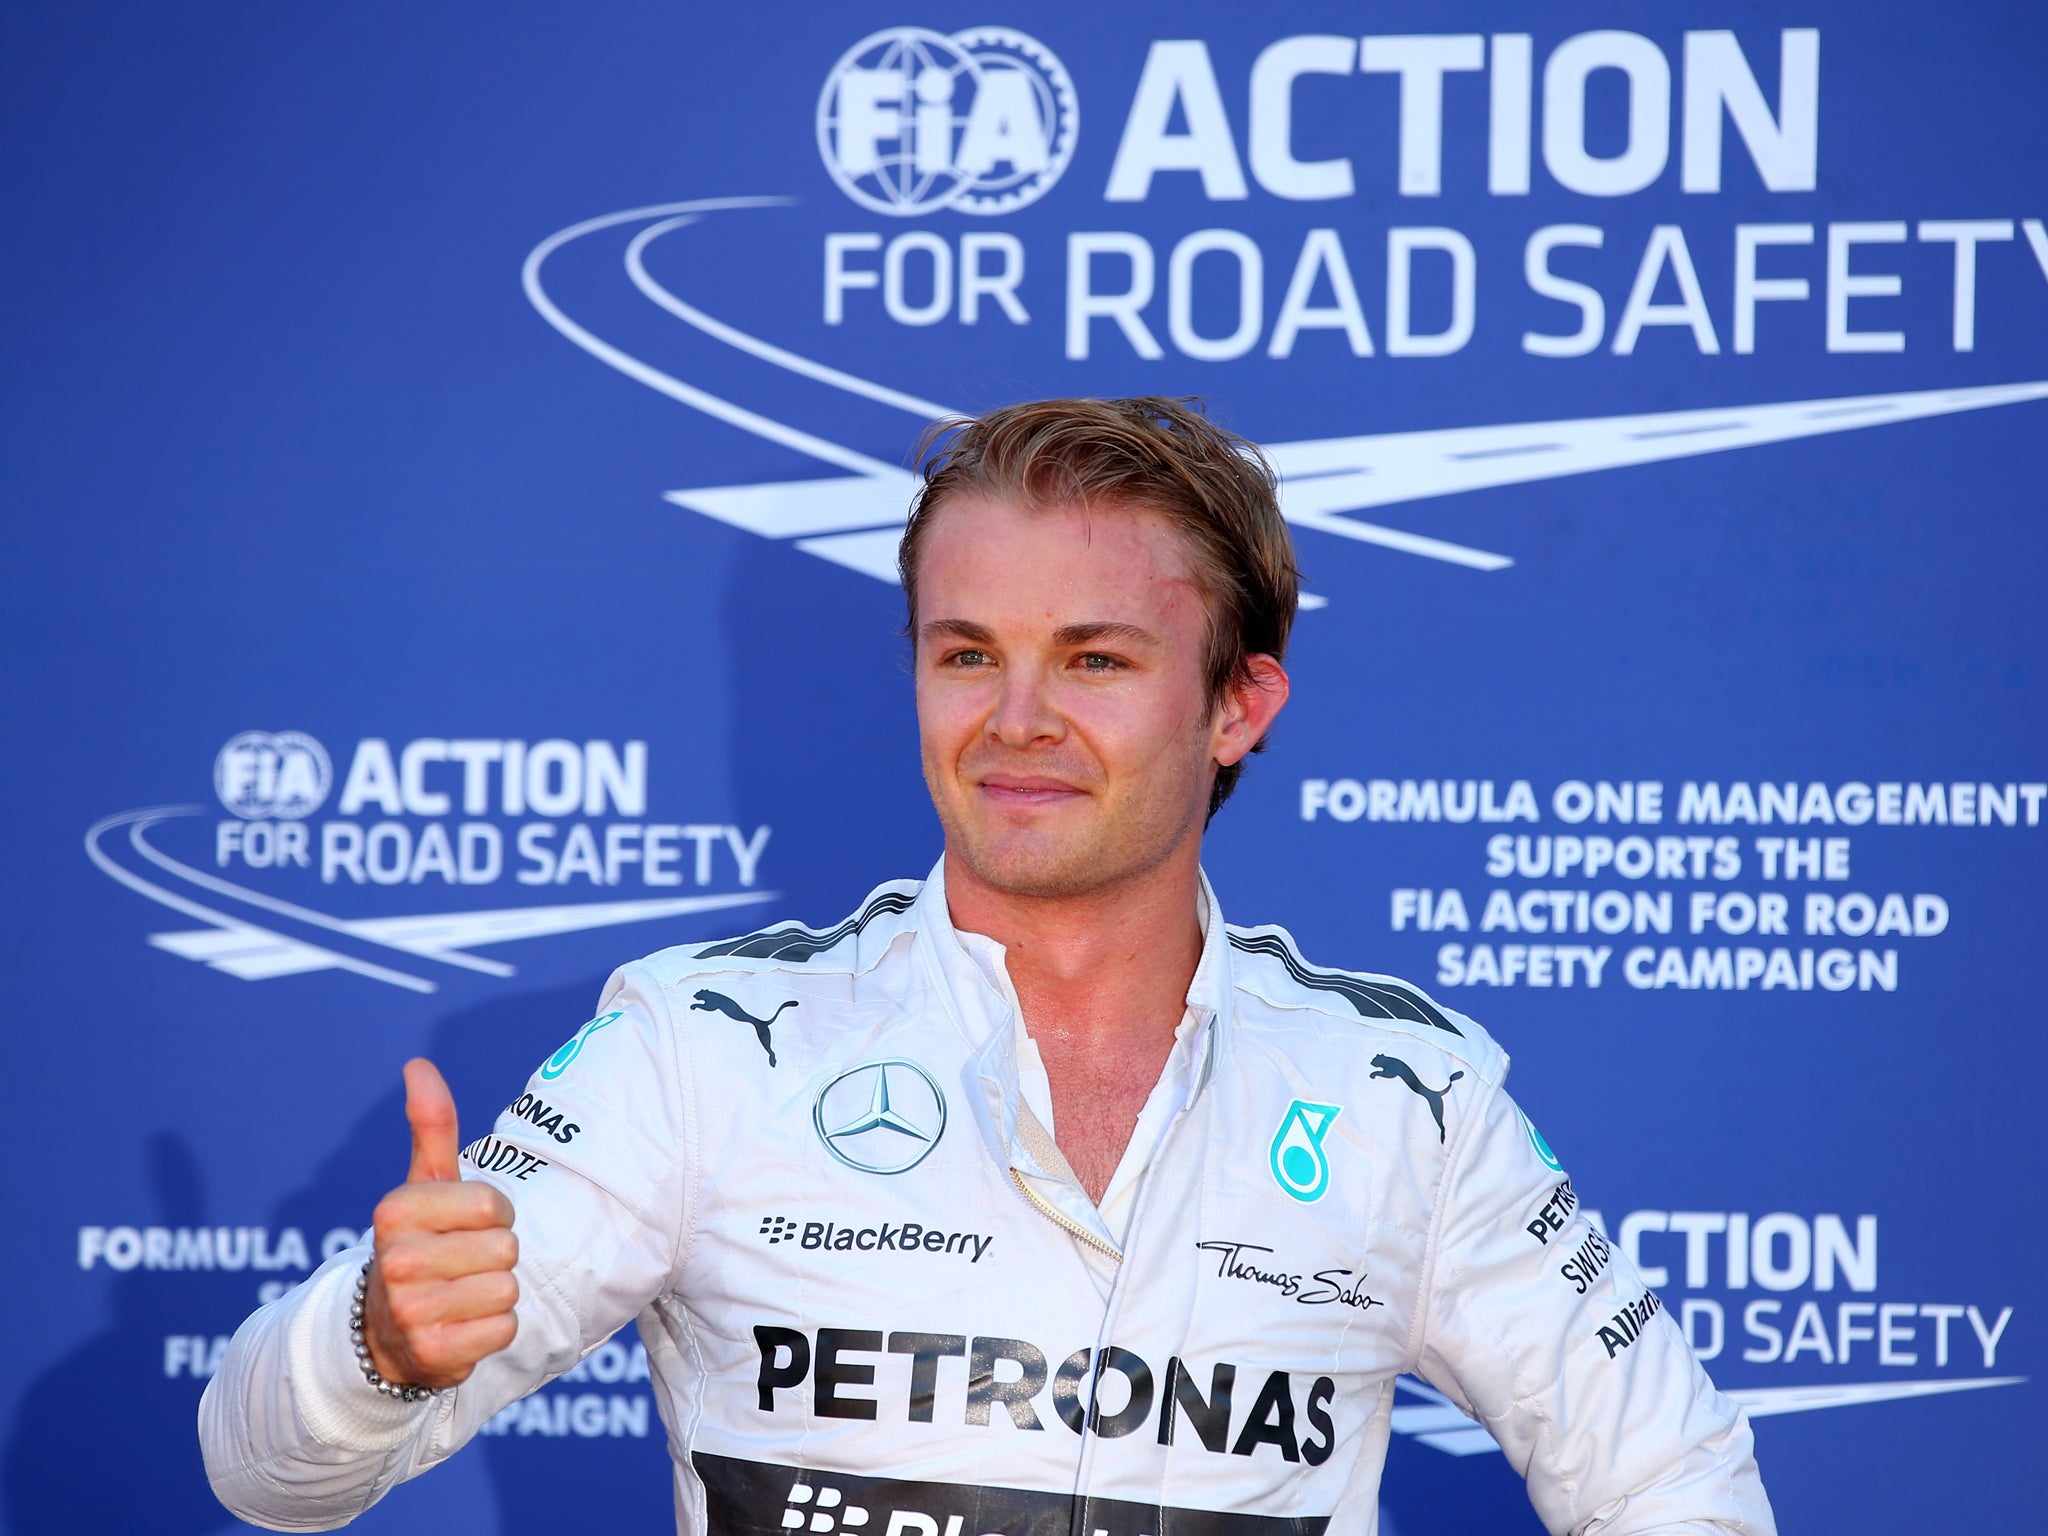 Nico Rosberg clinched pole at Monaco after beating his Mercedes team-mate Lewis Hamilton